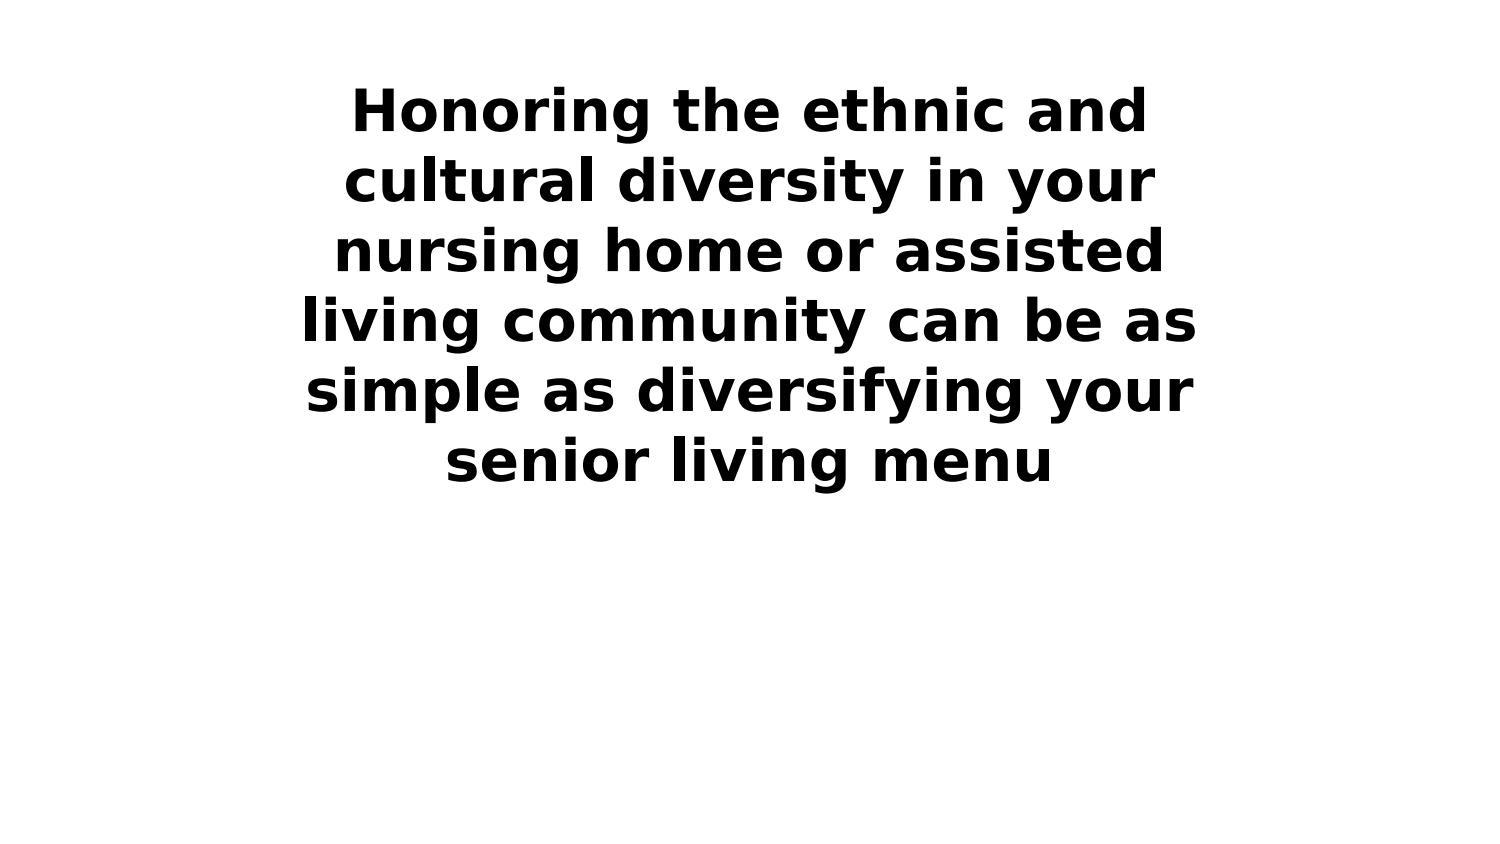 Honoring the ethnic and cultural diversity in your nursing home or assisted living community